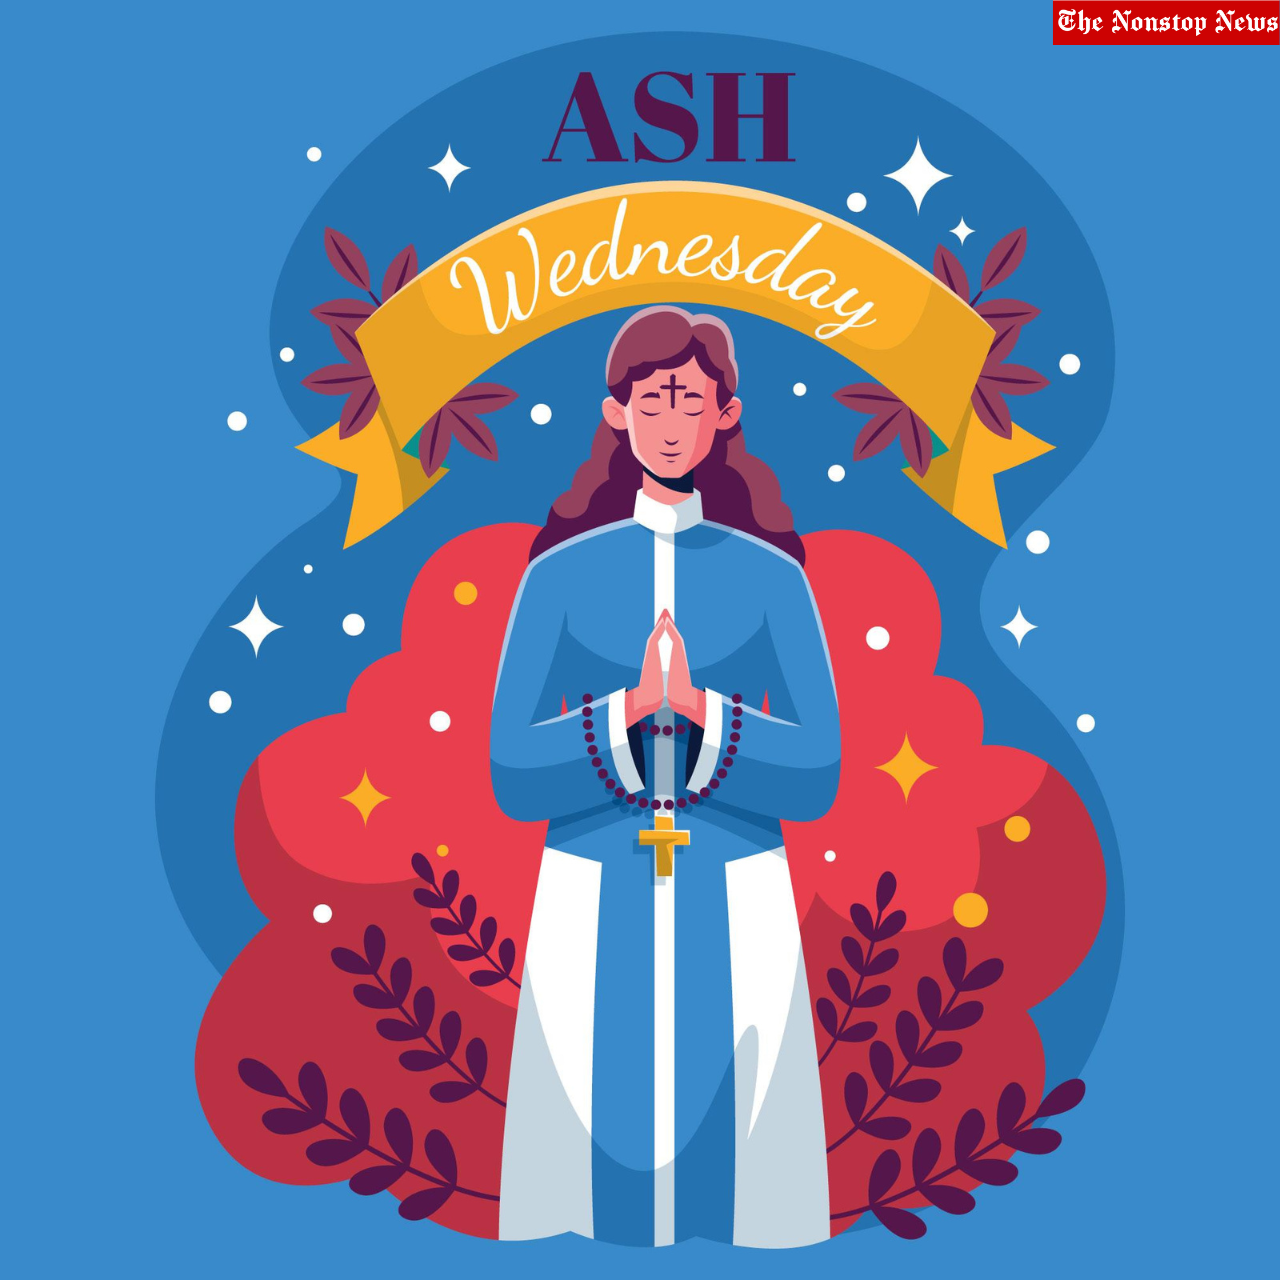 Ash Wednesday 2023 Quotes, Wishes, Stickers, Slogans, Sayings, Messages, Greetings, Instagram Captions and Cliparts